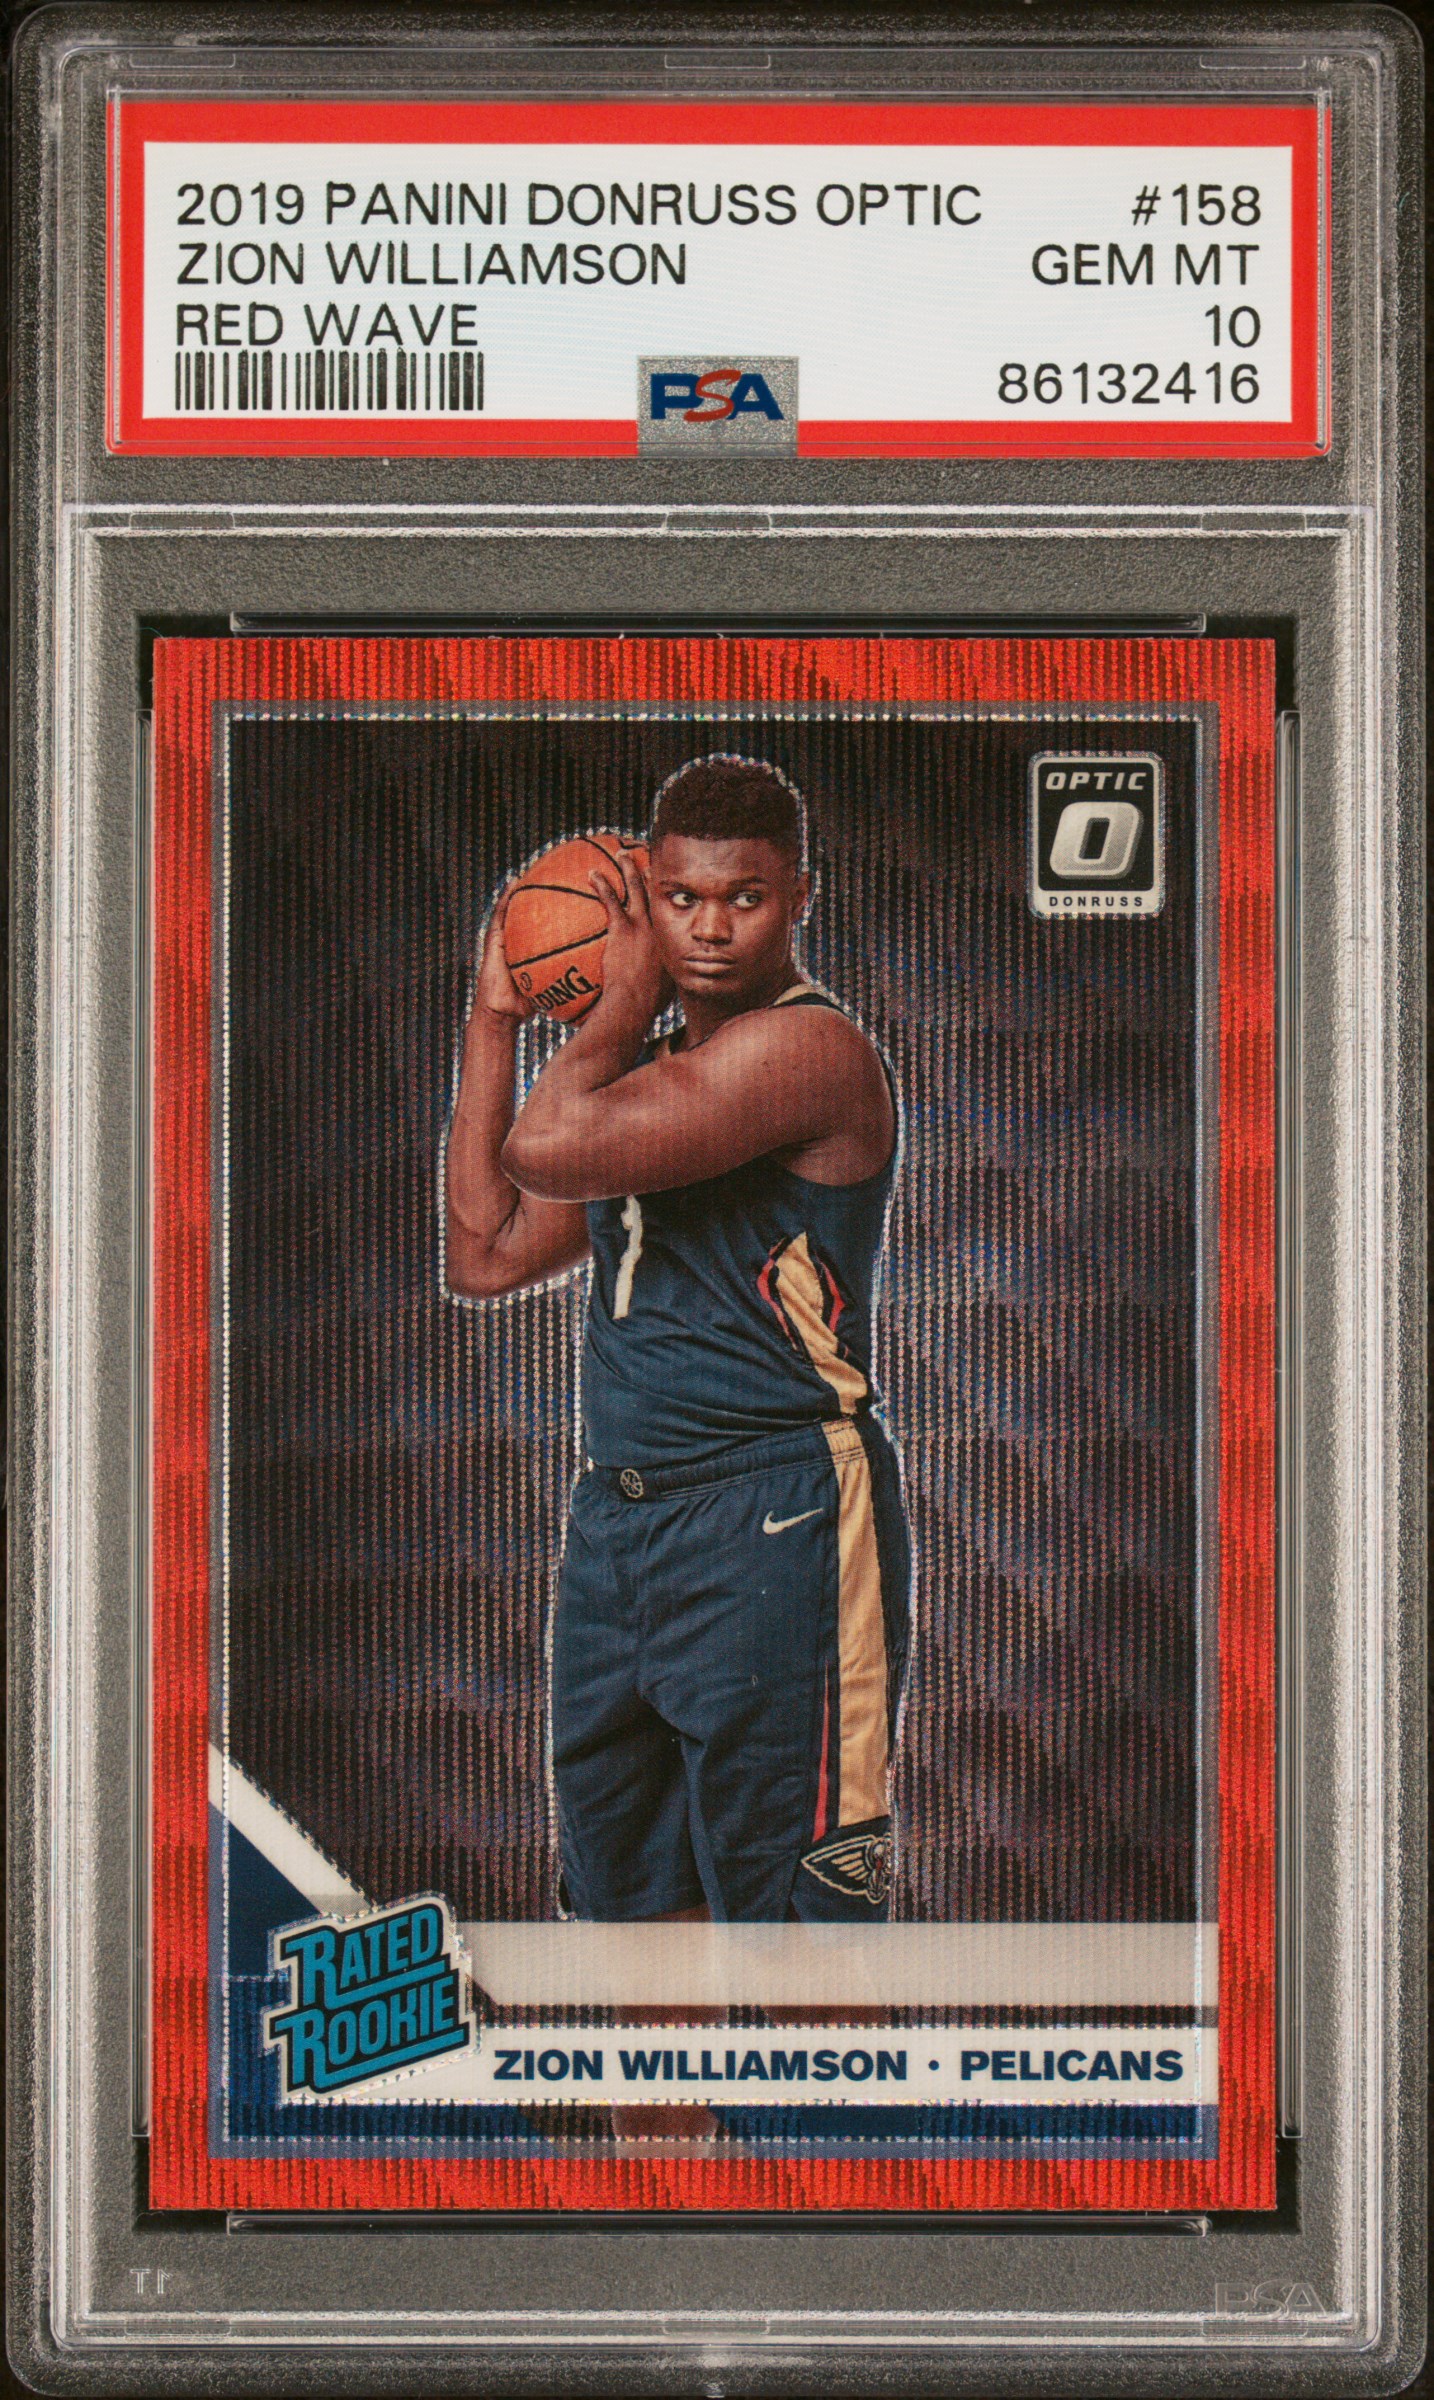 2019-20 Panini Donruss Optic Red Wave Rated Rookie #158 Zion Williamson Rookie Card – PSA GEM MT 10